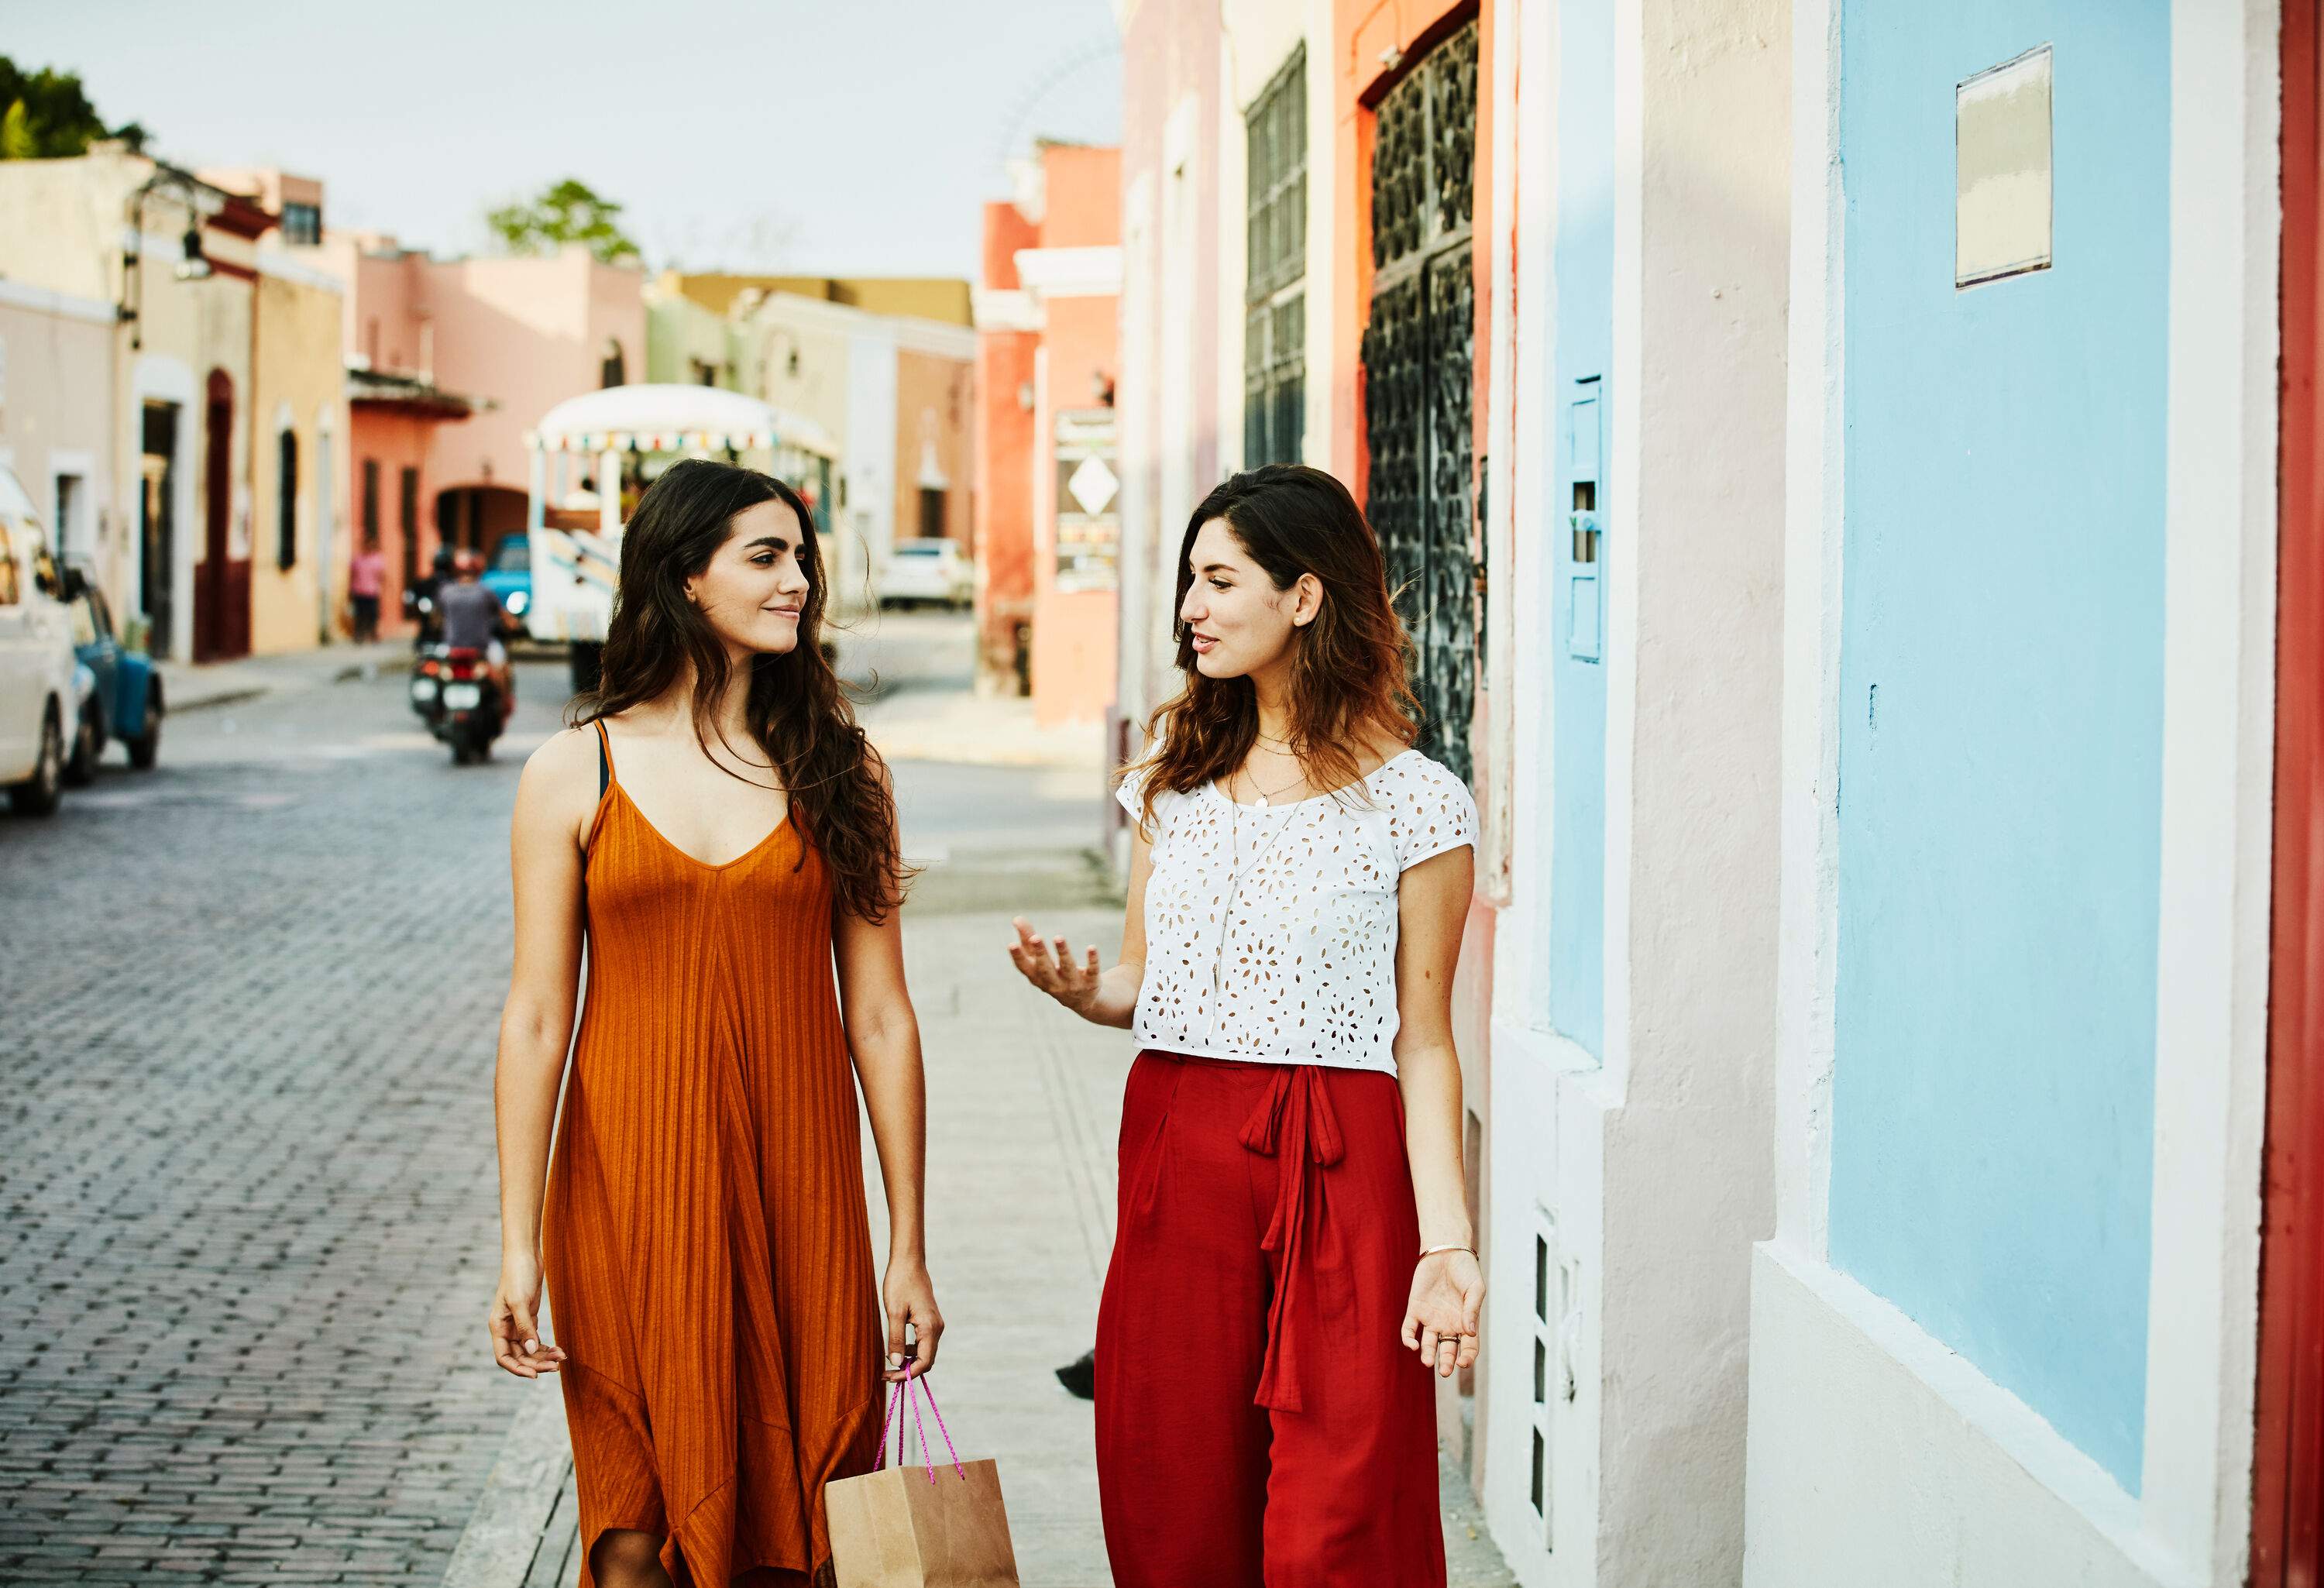 Two female friends chatting as they go along the sidewalk.